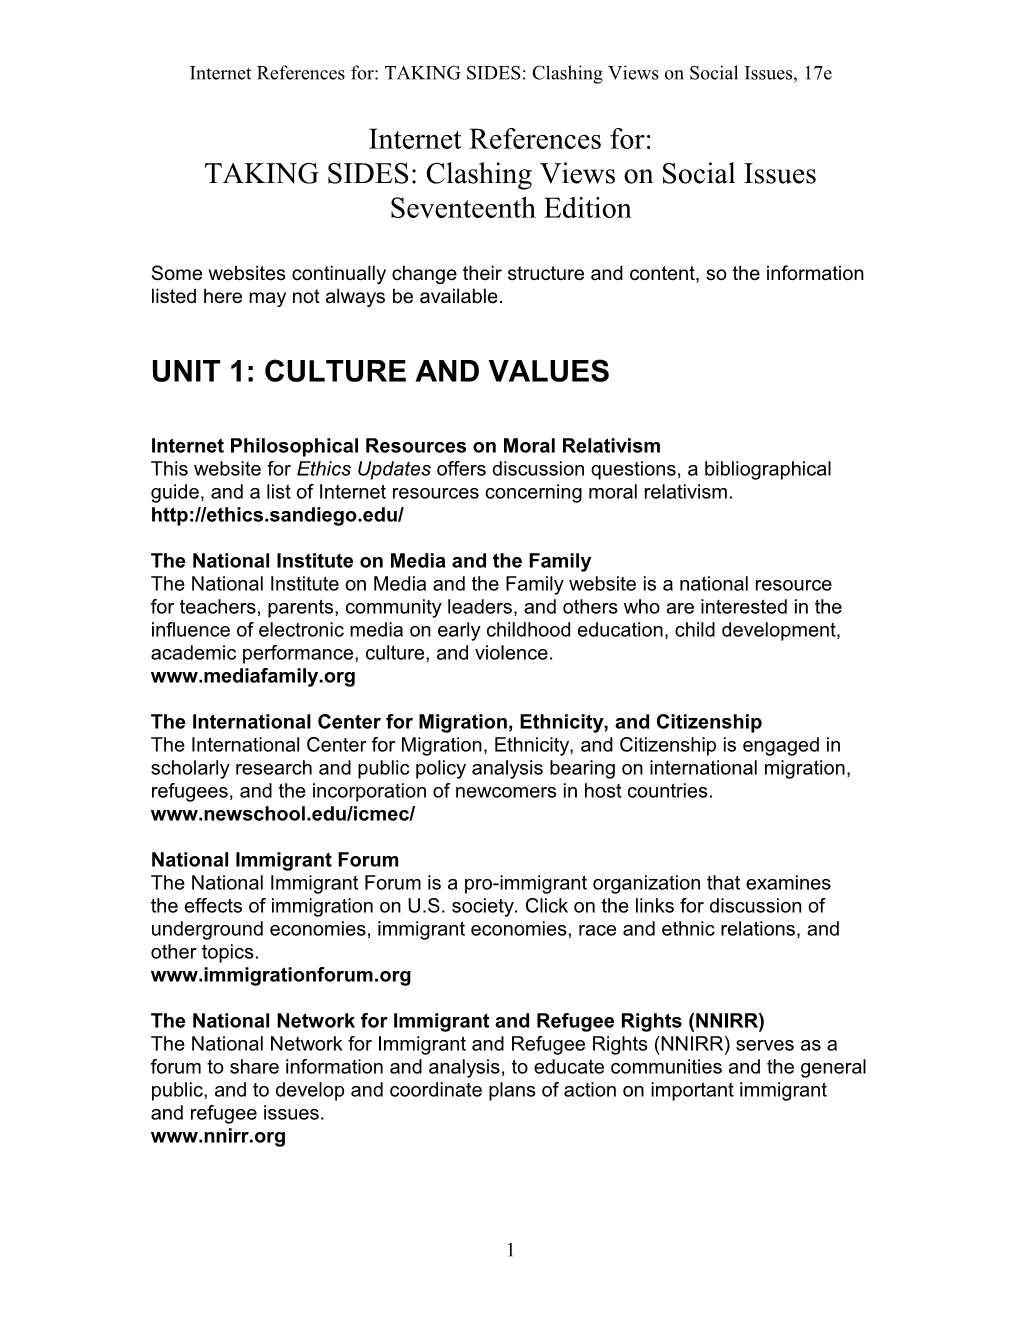 Internet References For:TAKING SIDES: Clashing Views on Social Issues,17E